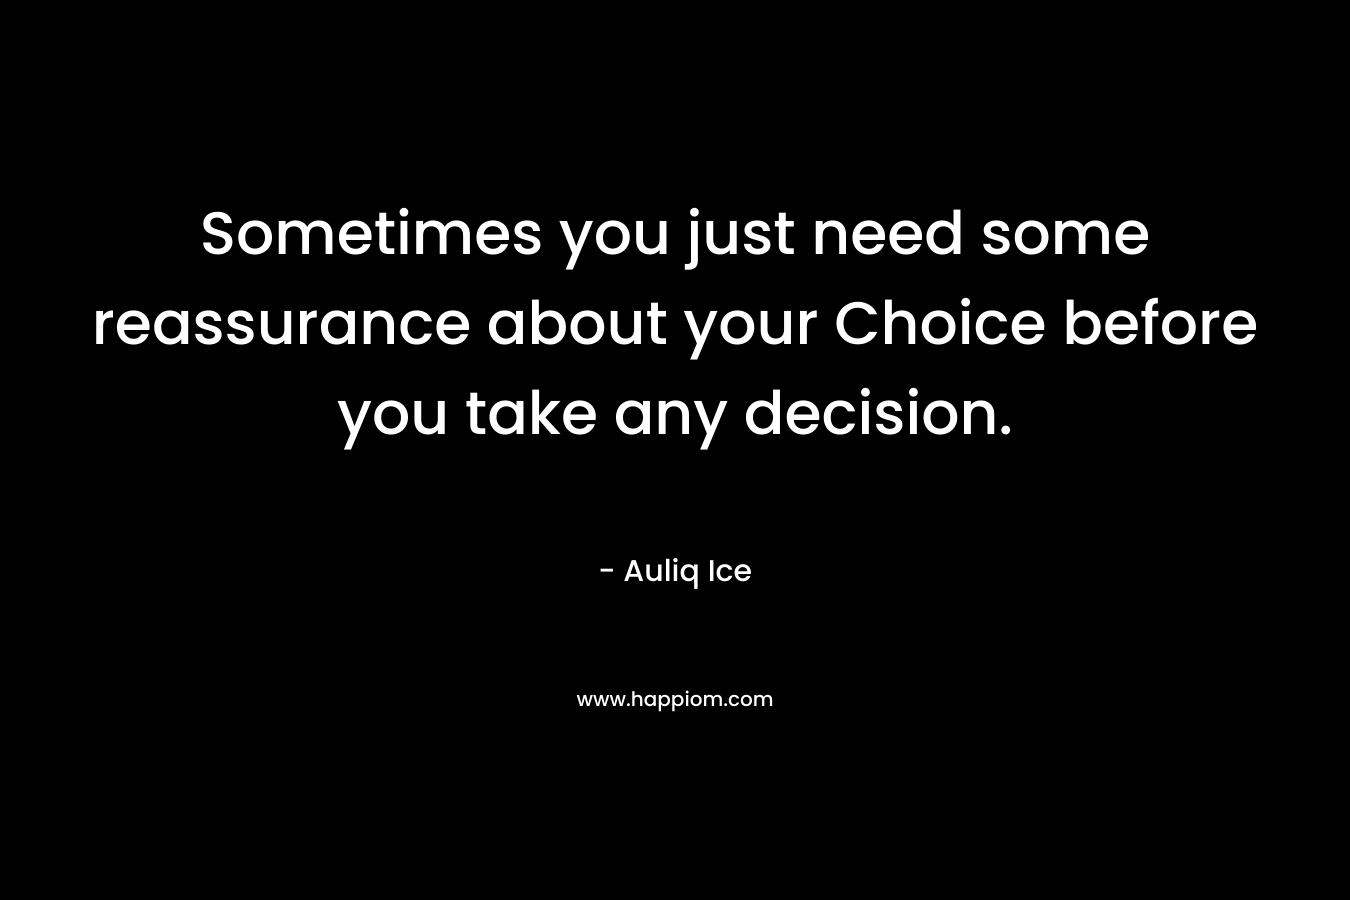 Sometimes you just need some reassurance about your Choice before you take any decision. – Auliq Ice